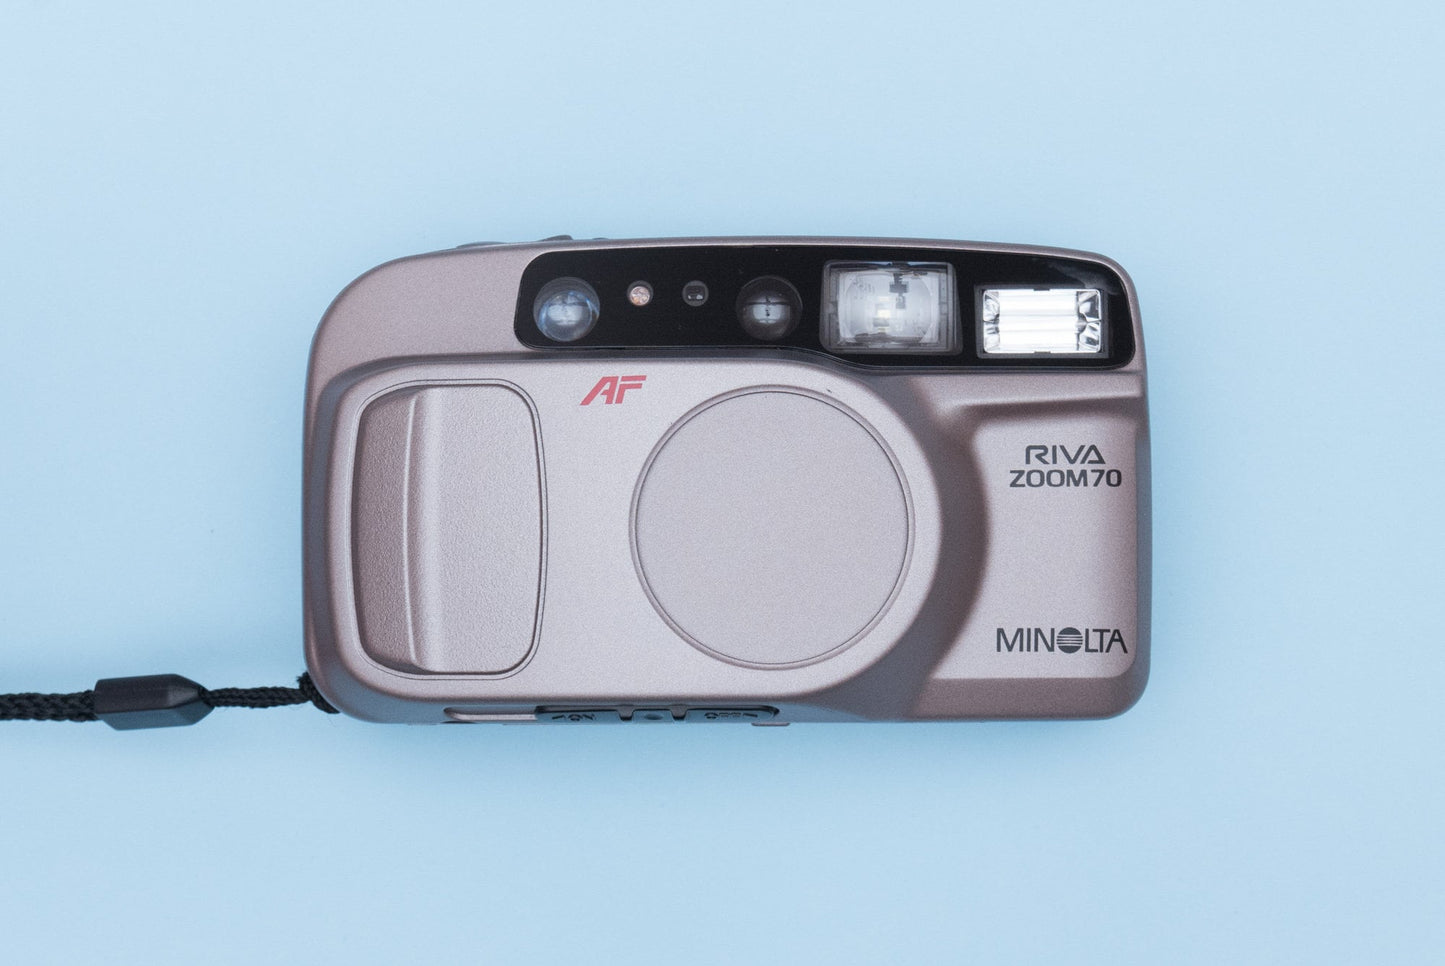 Minolta Riva Zoom 70 Compact 35mm Point and Shoot Film Camera Graphite